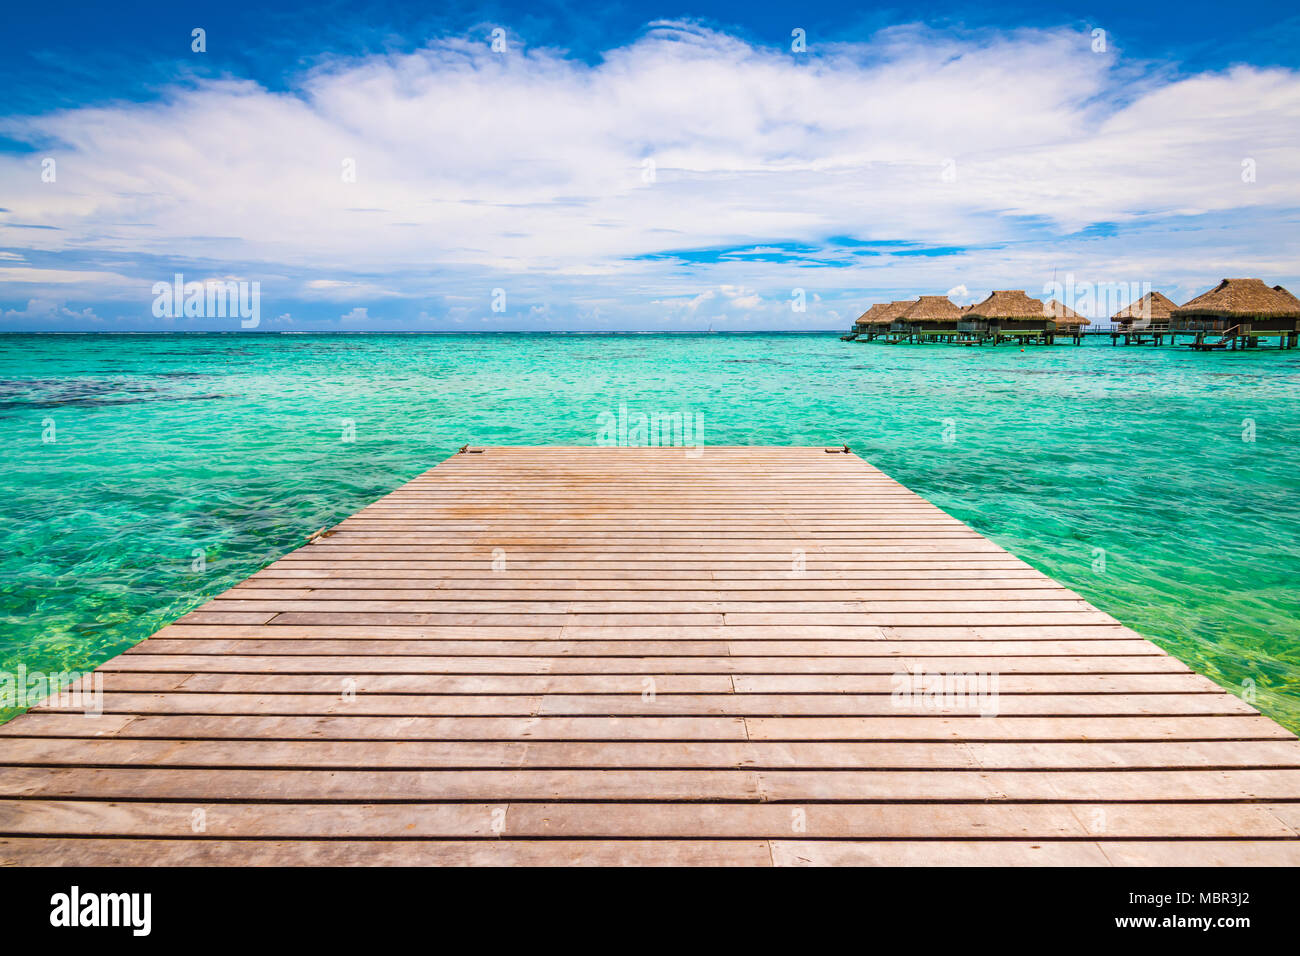 Wooden jetty or pier over tropical blue lagoon in Moorea, French Polynesia. Stock Photo